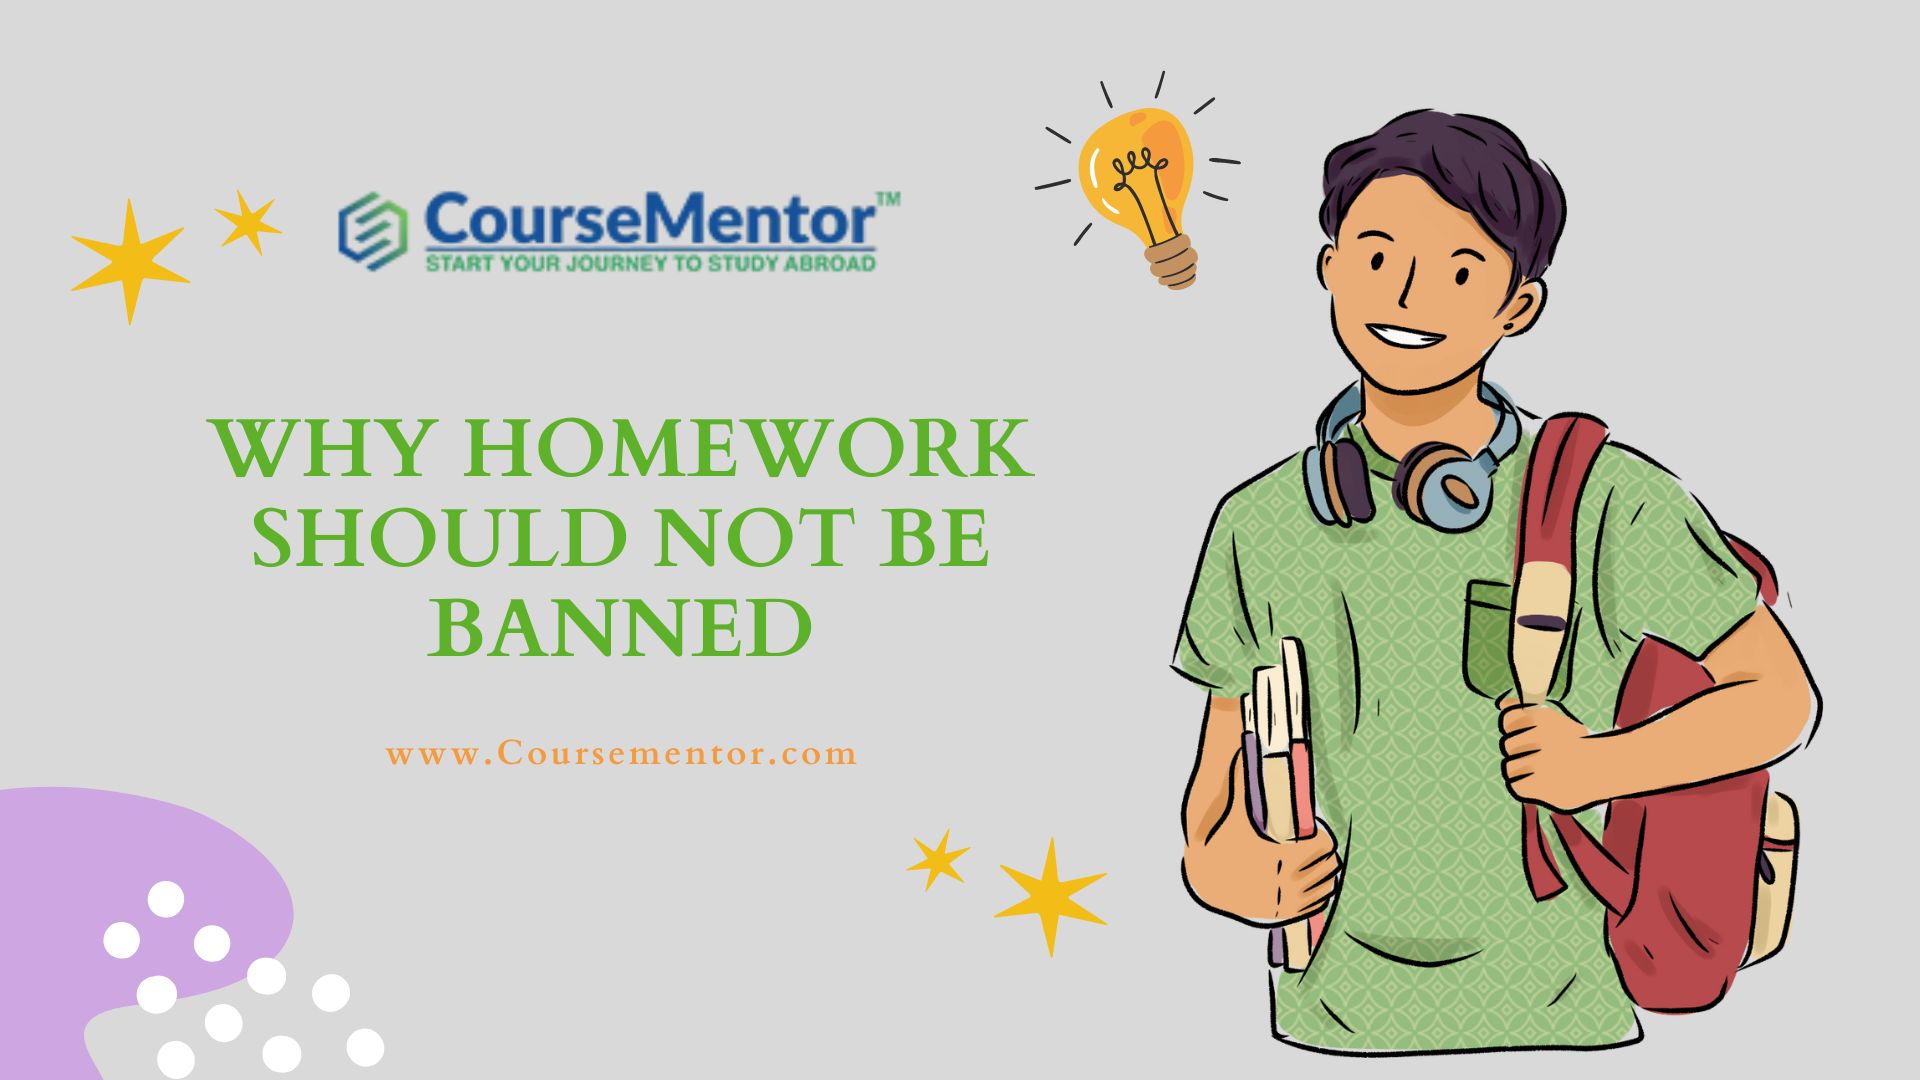 Why Homework Should not be Banned